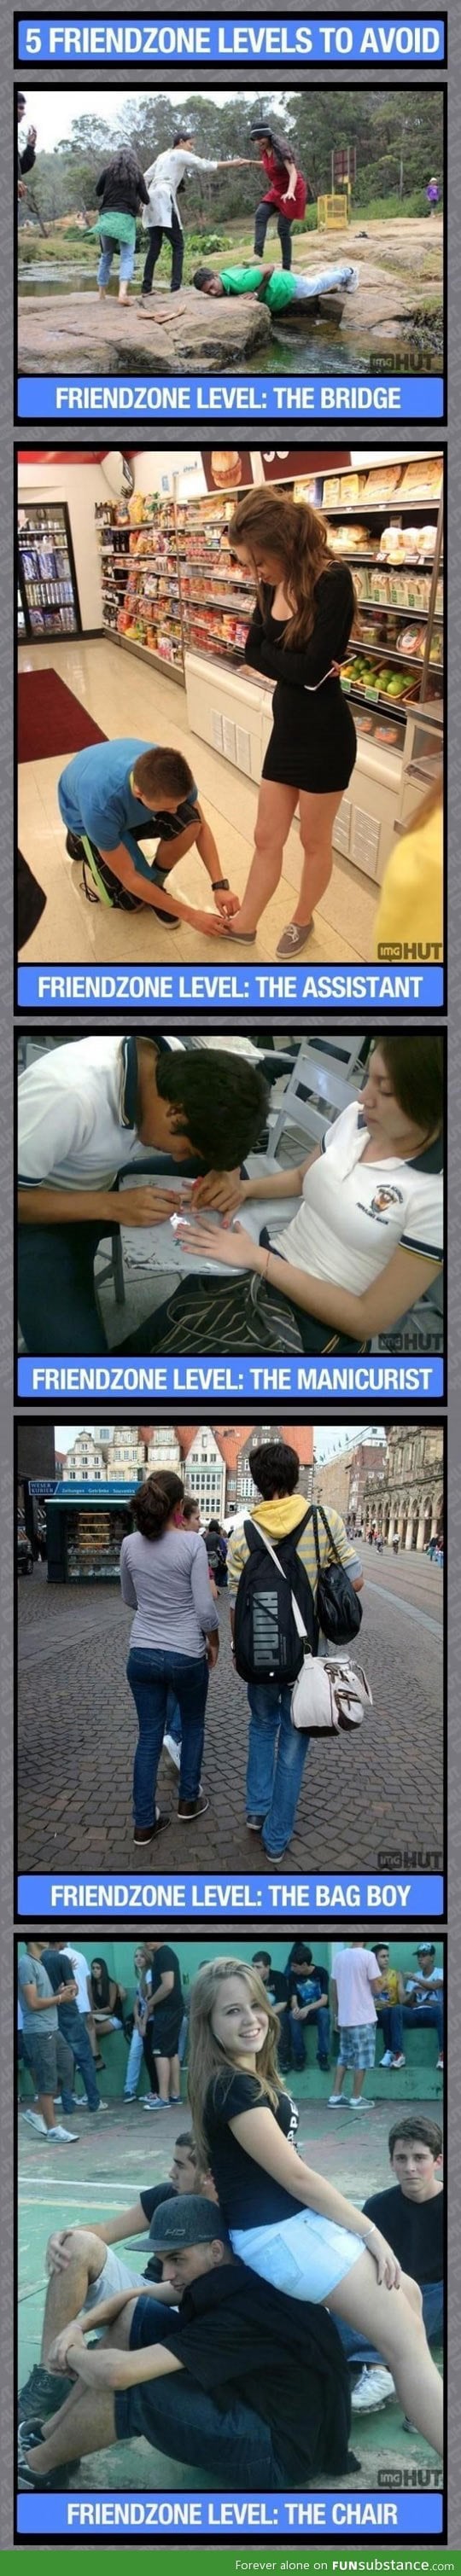 5 levels of friendzone to avoid